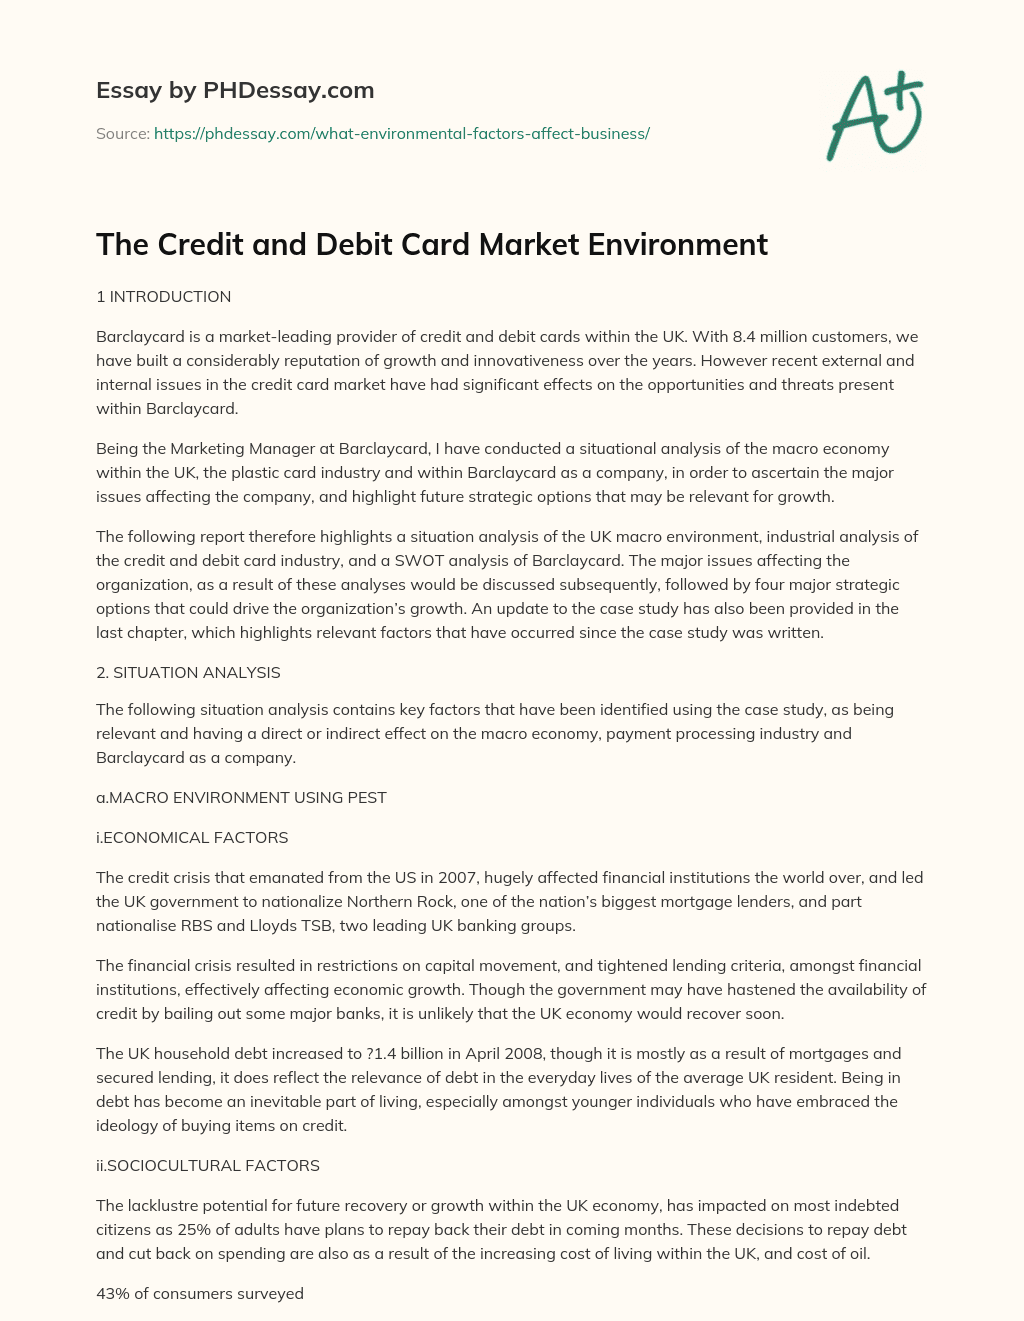 The Credit and Debit Card Market Environment essay